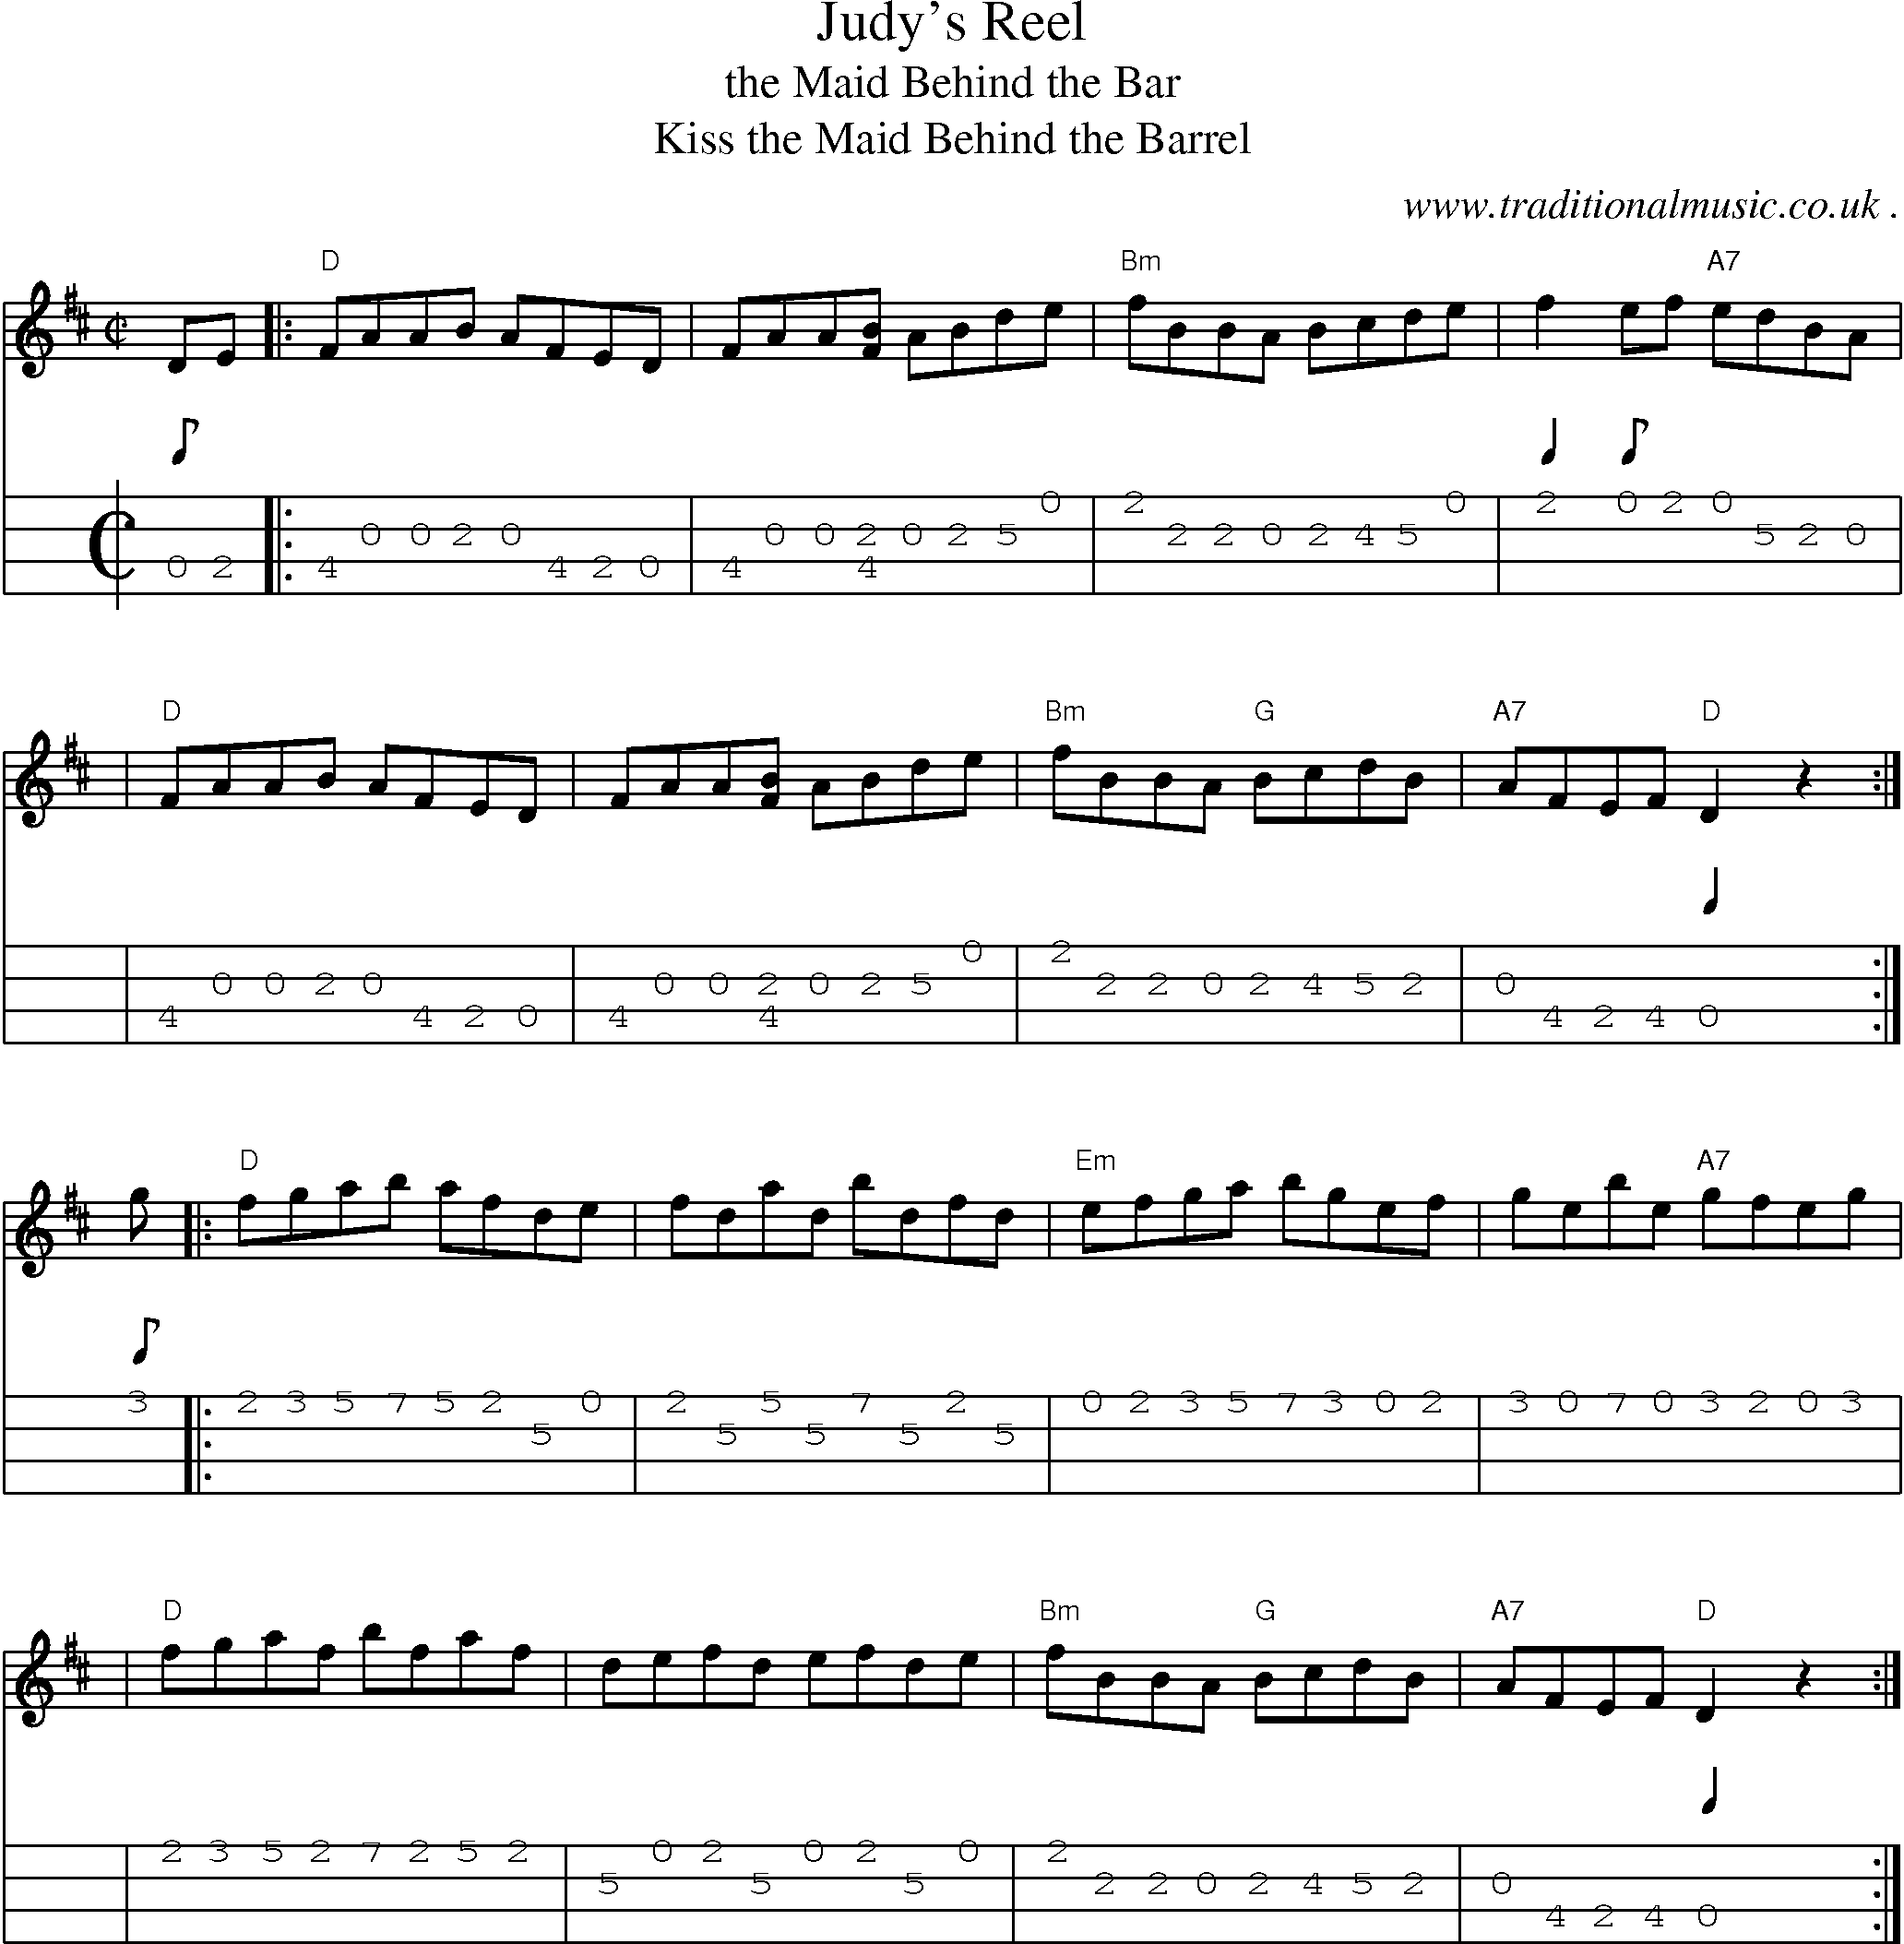 Sheet-music  score, Chords and Mandolin Tabs for Judys Reel